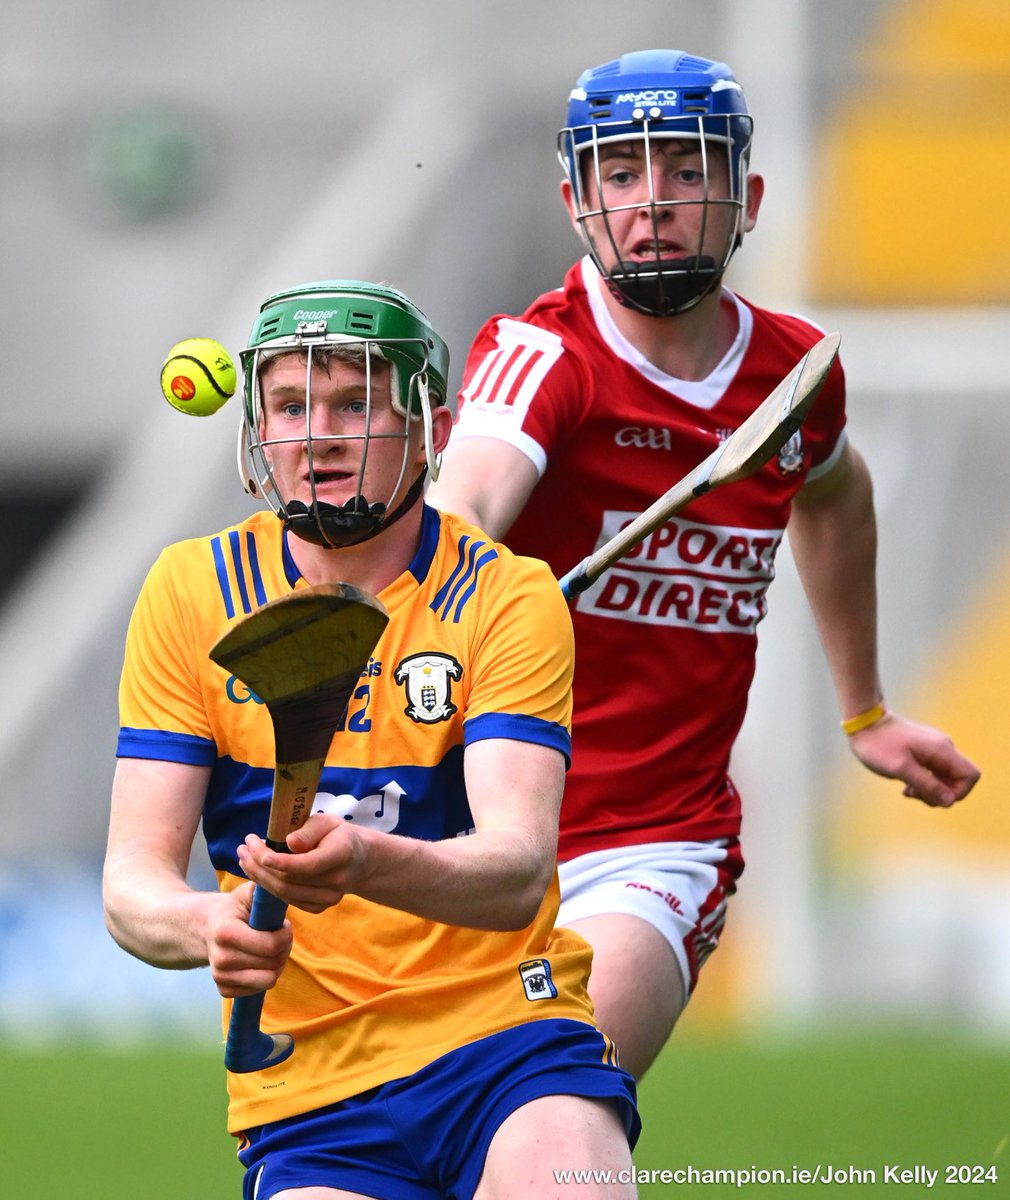 Harry Doherty of Clare in action against Kevin Beechinor of Cork during their Munster Minor Hurling Championship game at Pairc Ui Chaoimh. Photograph by John Kelly. The score after the third quarter is @GaaClare 1-15 , @OfficialCorkGAA 0-15 @MunsterGAA #GAA